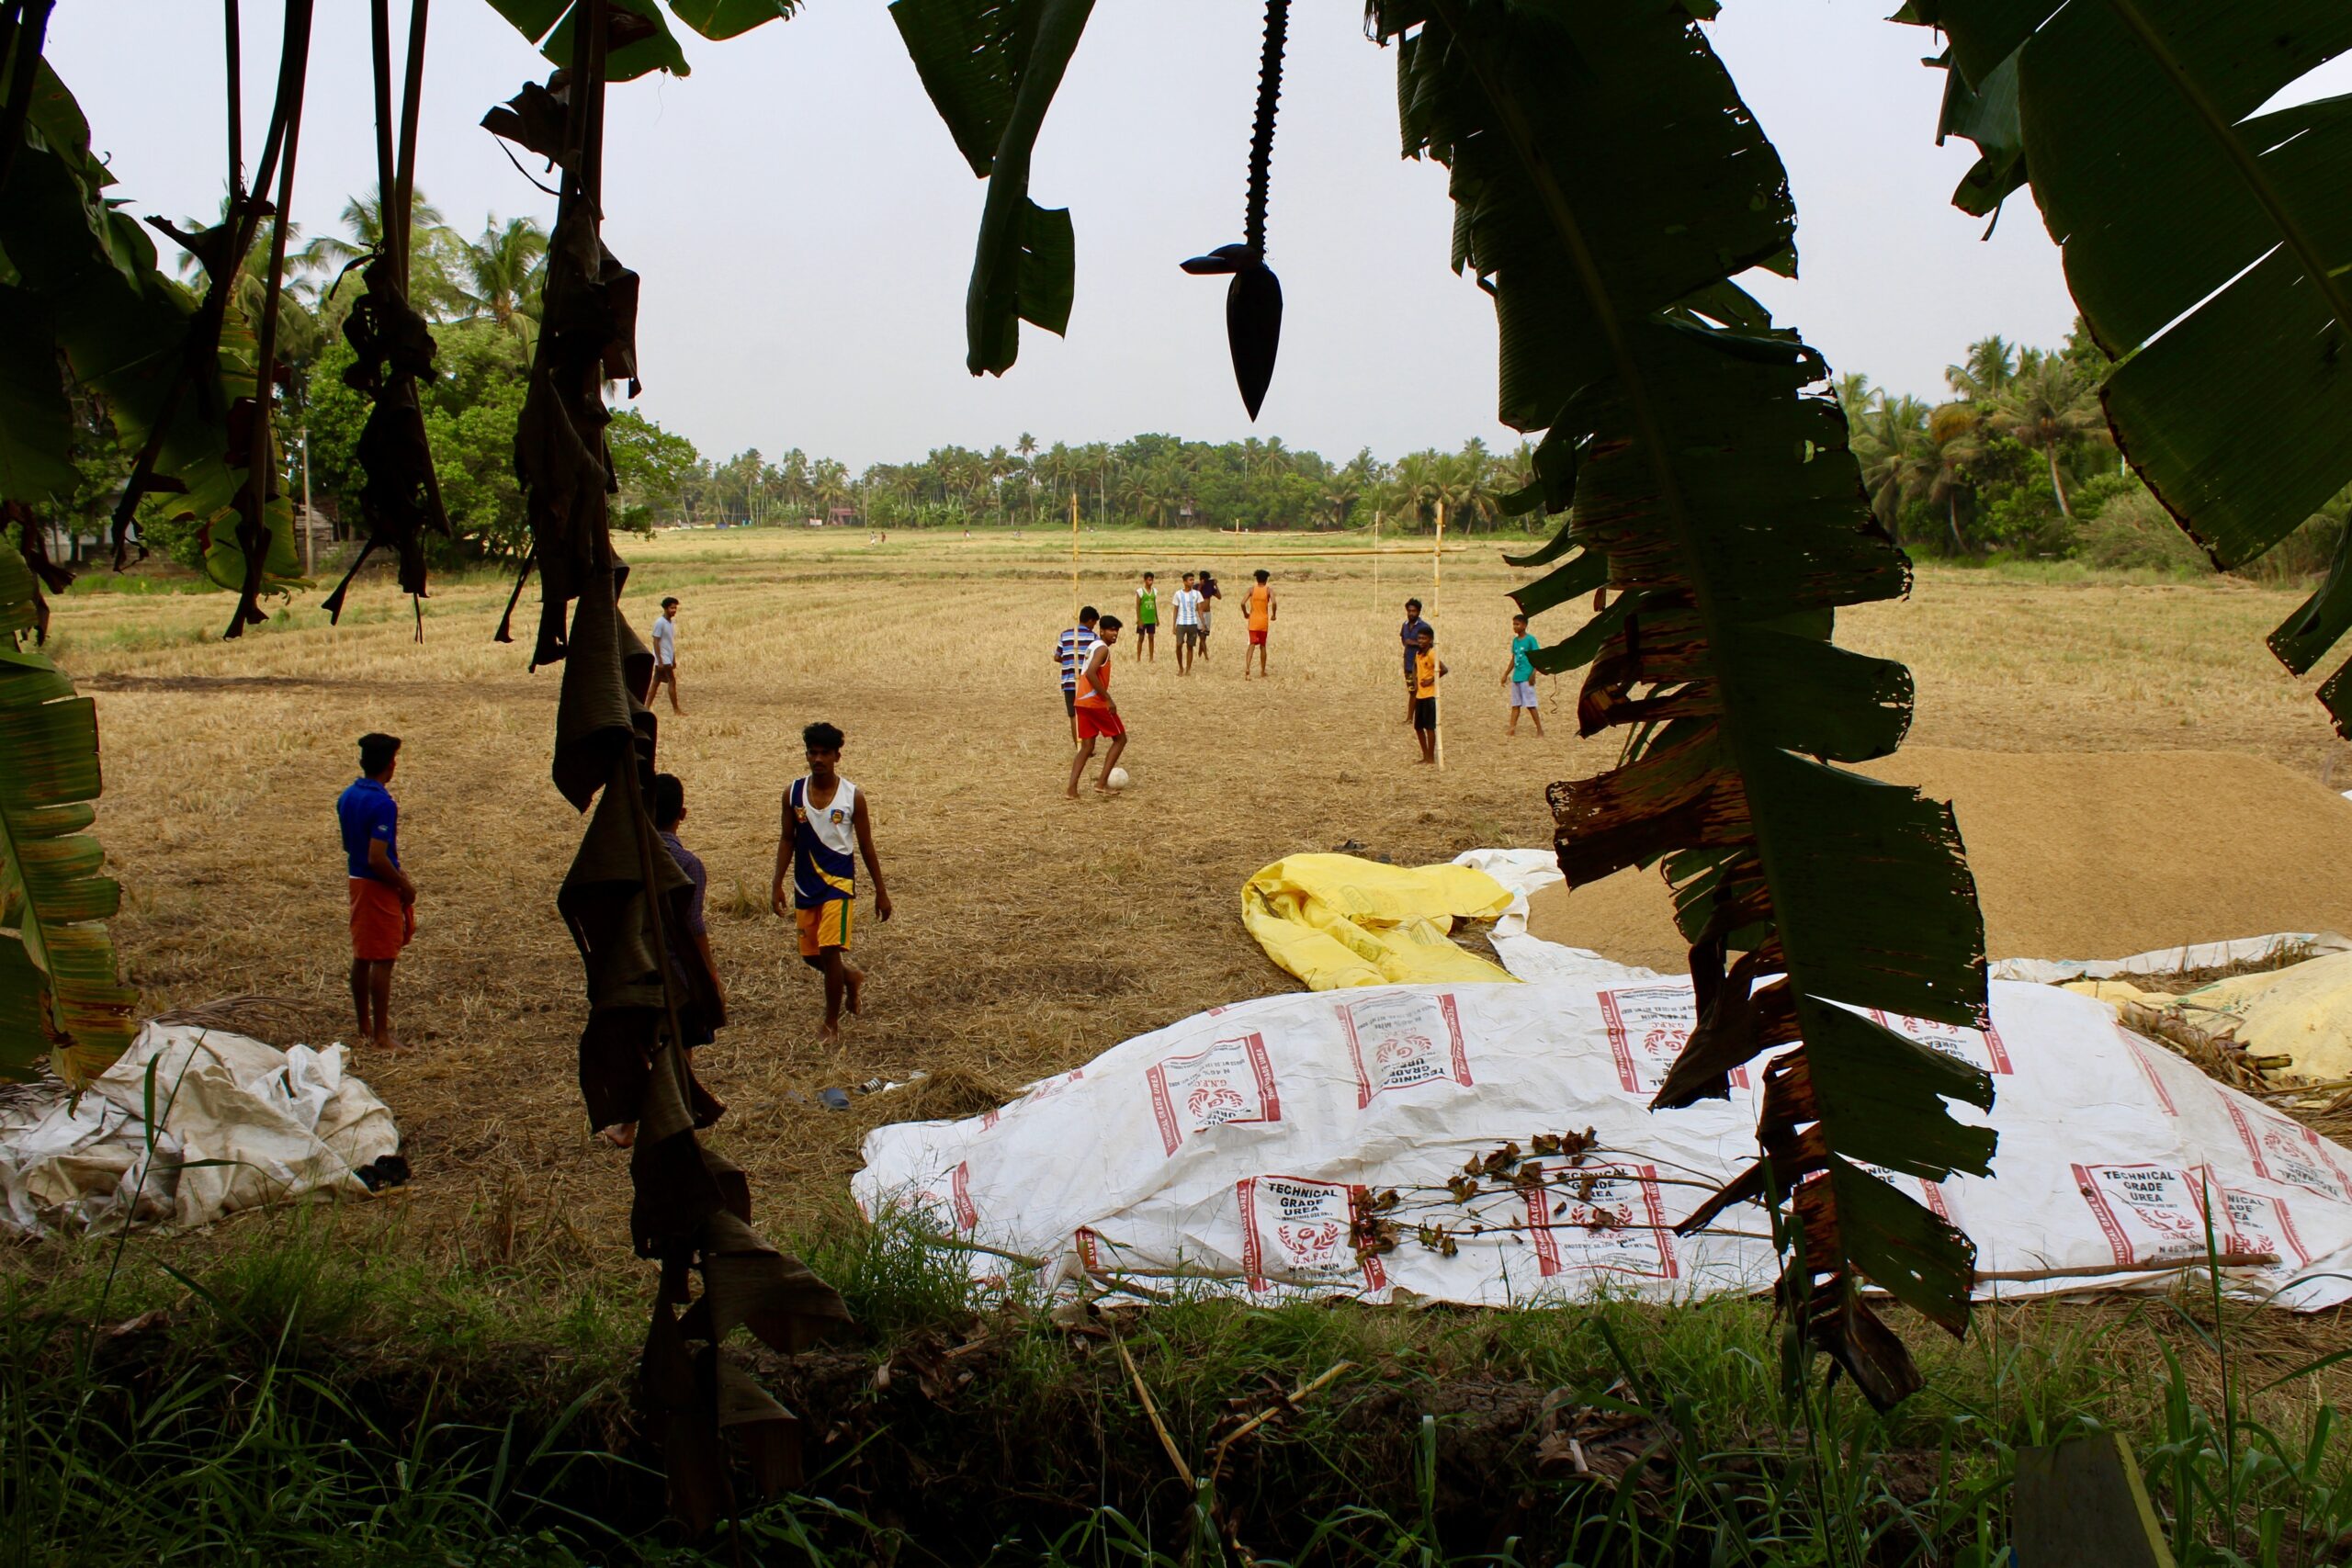 Village schoolboys play football in a recently harvested field.